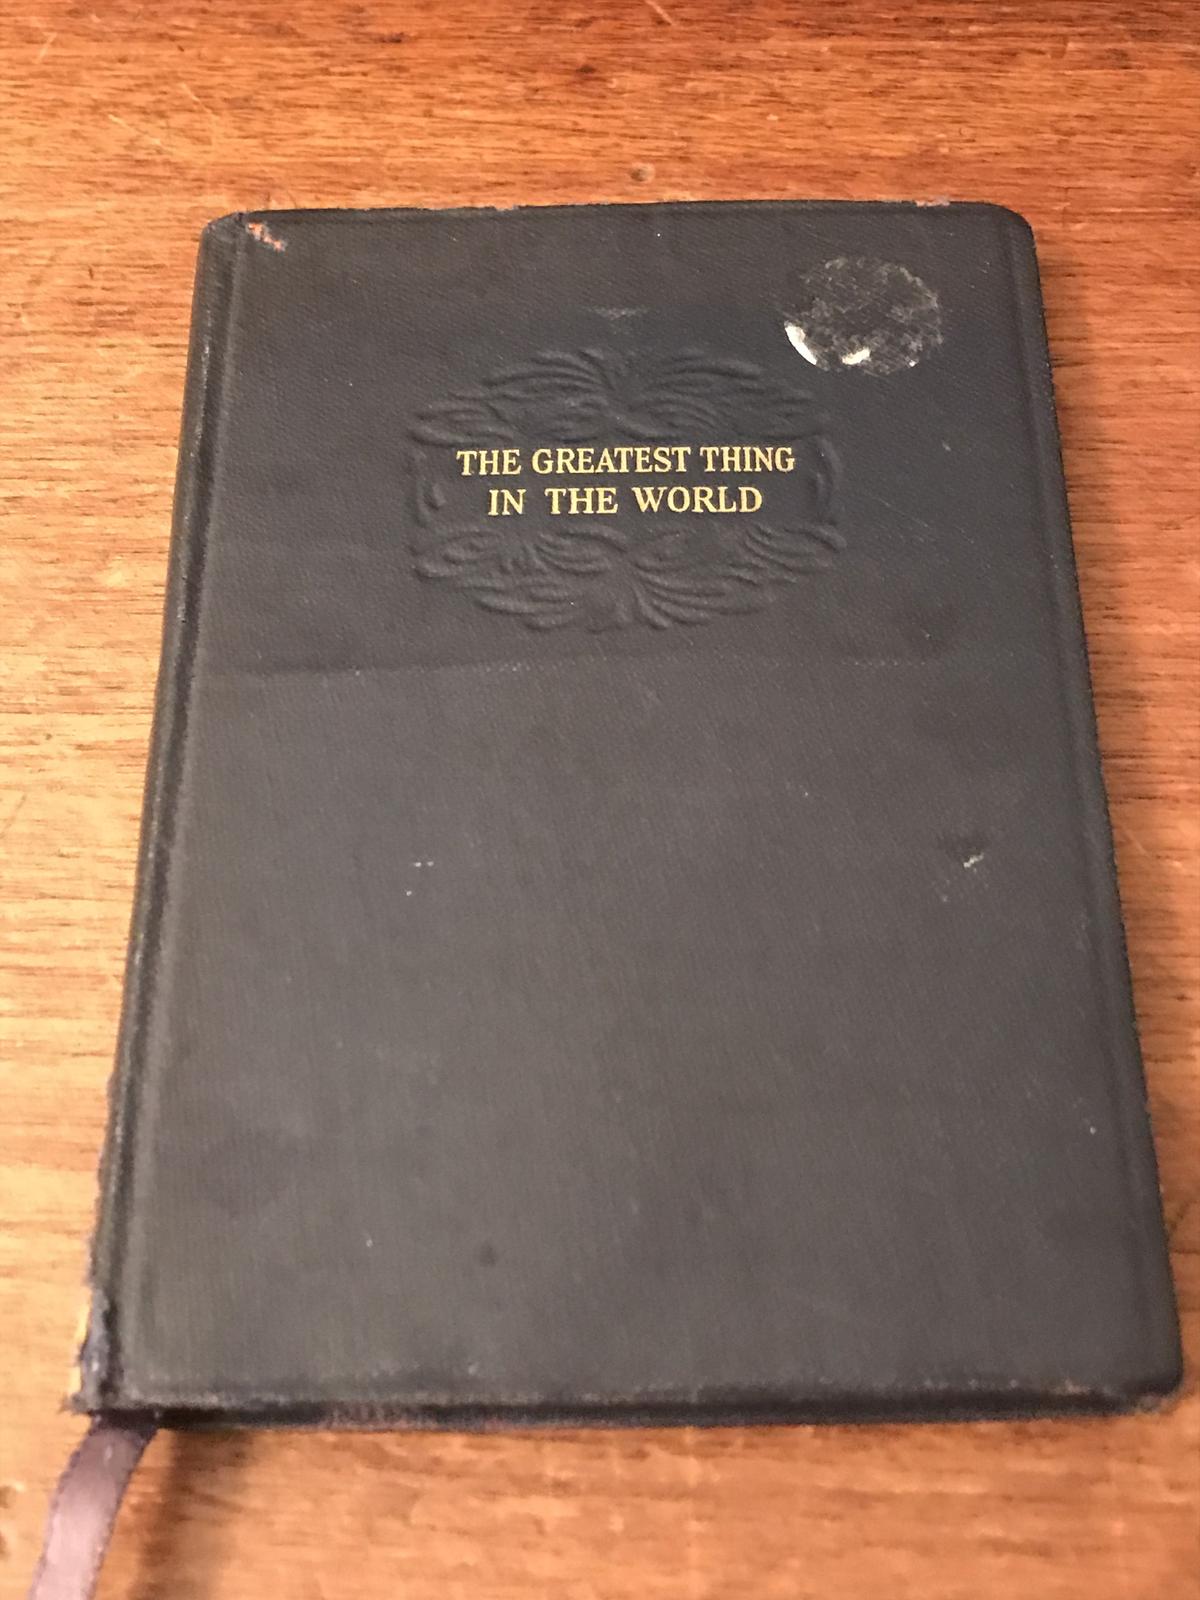 The Greatest Thing in The World book by Henry Drummond